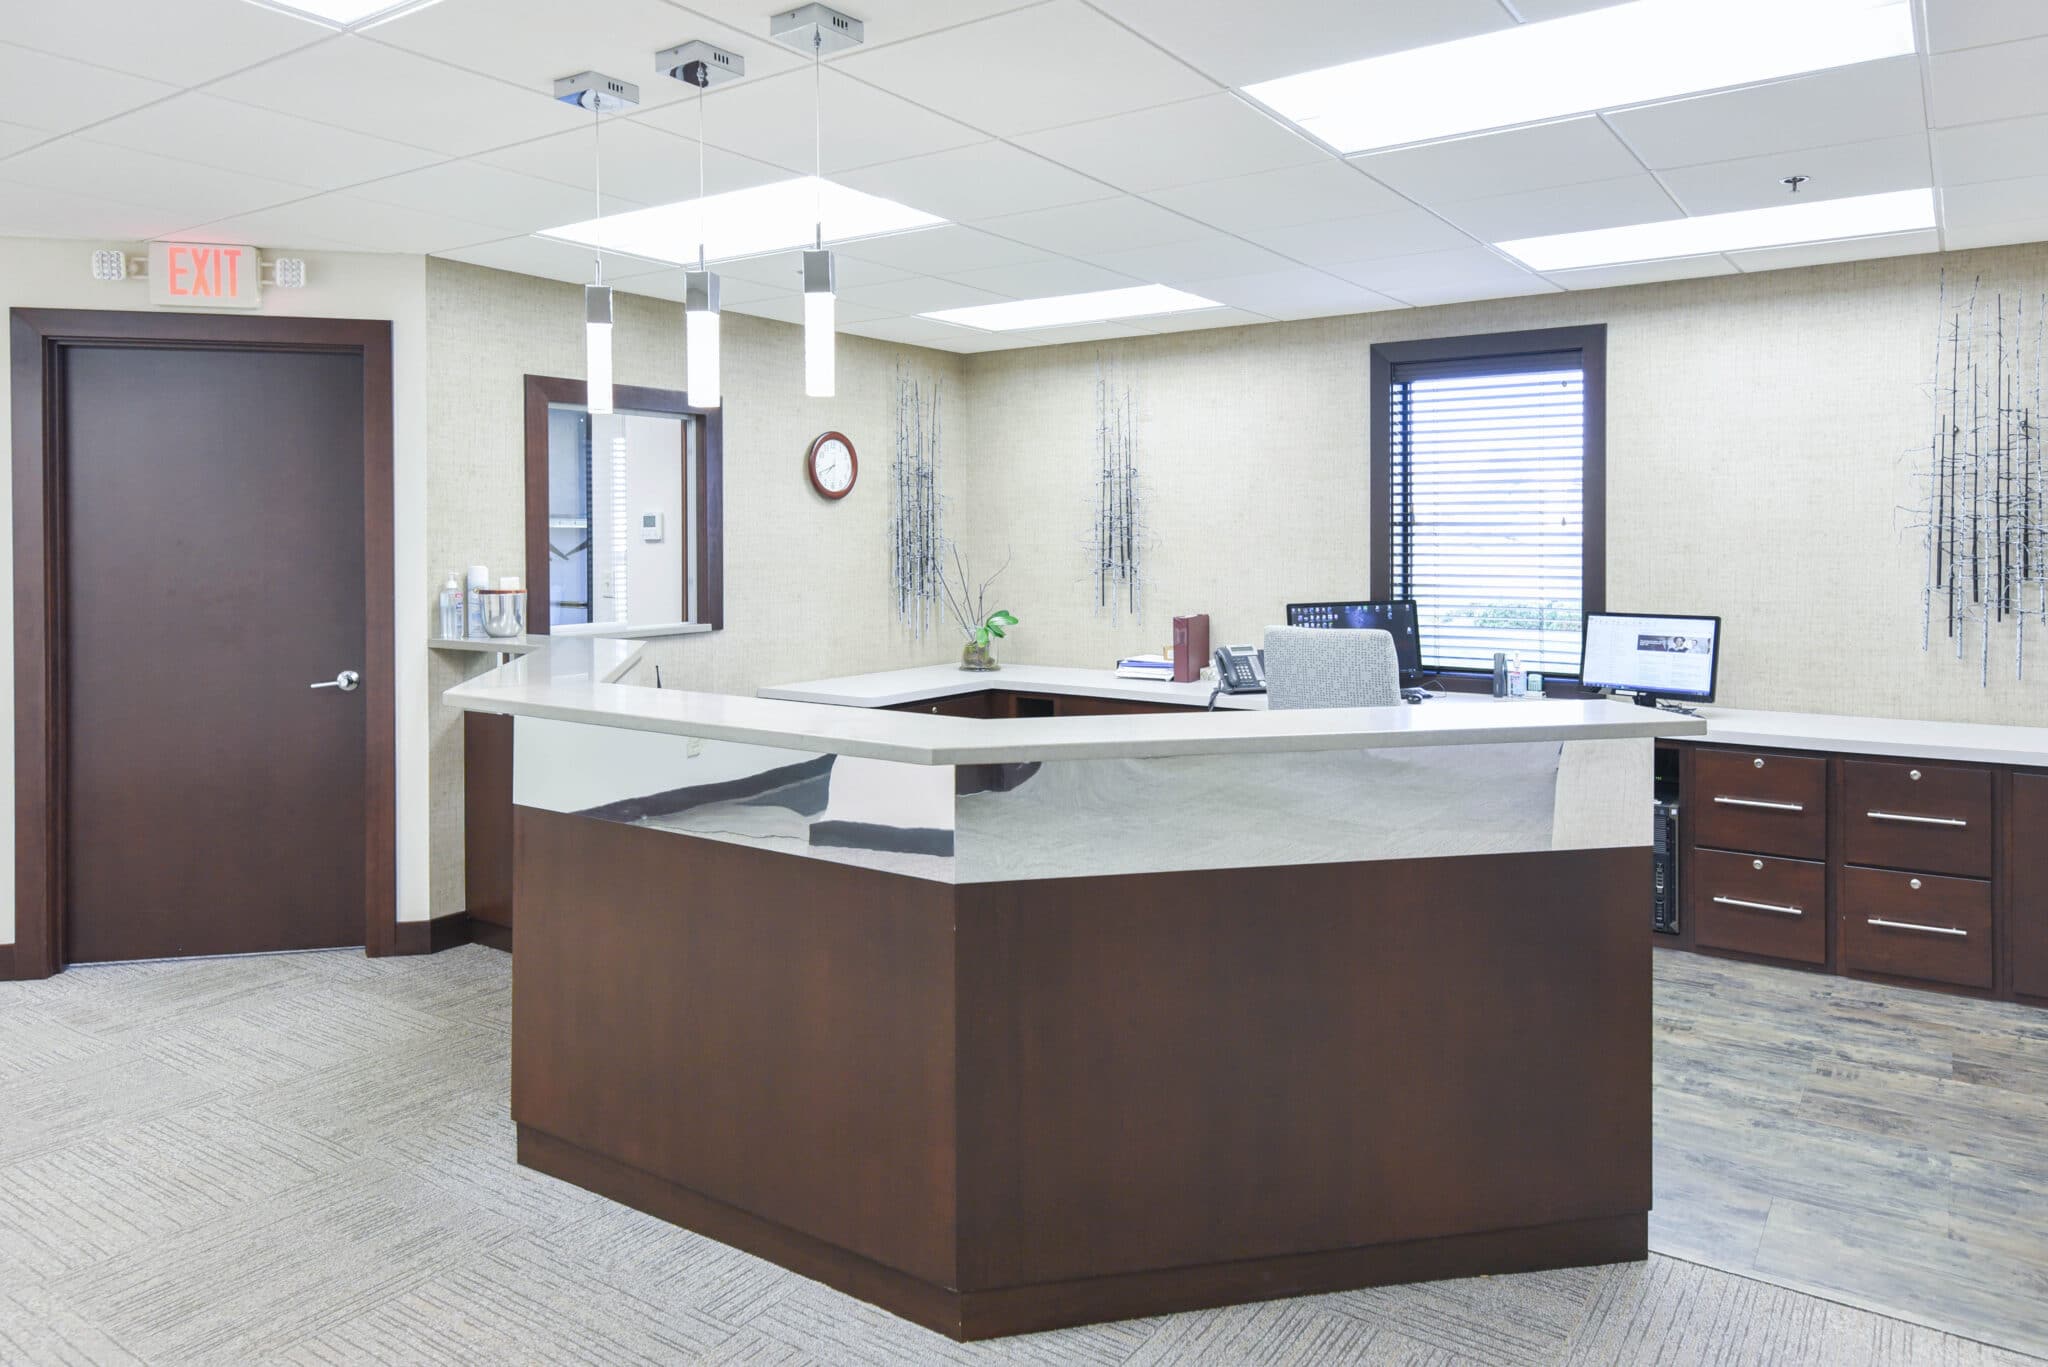 lobby and front desk of Ziggity Systems in Middlebury Indiana